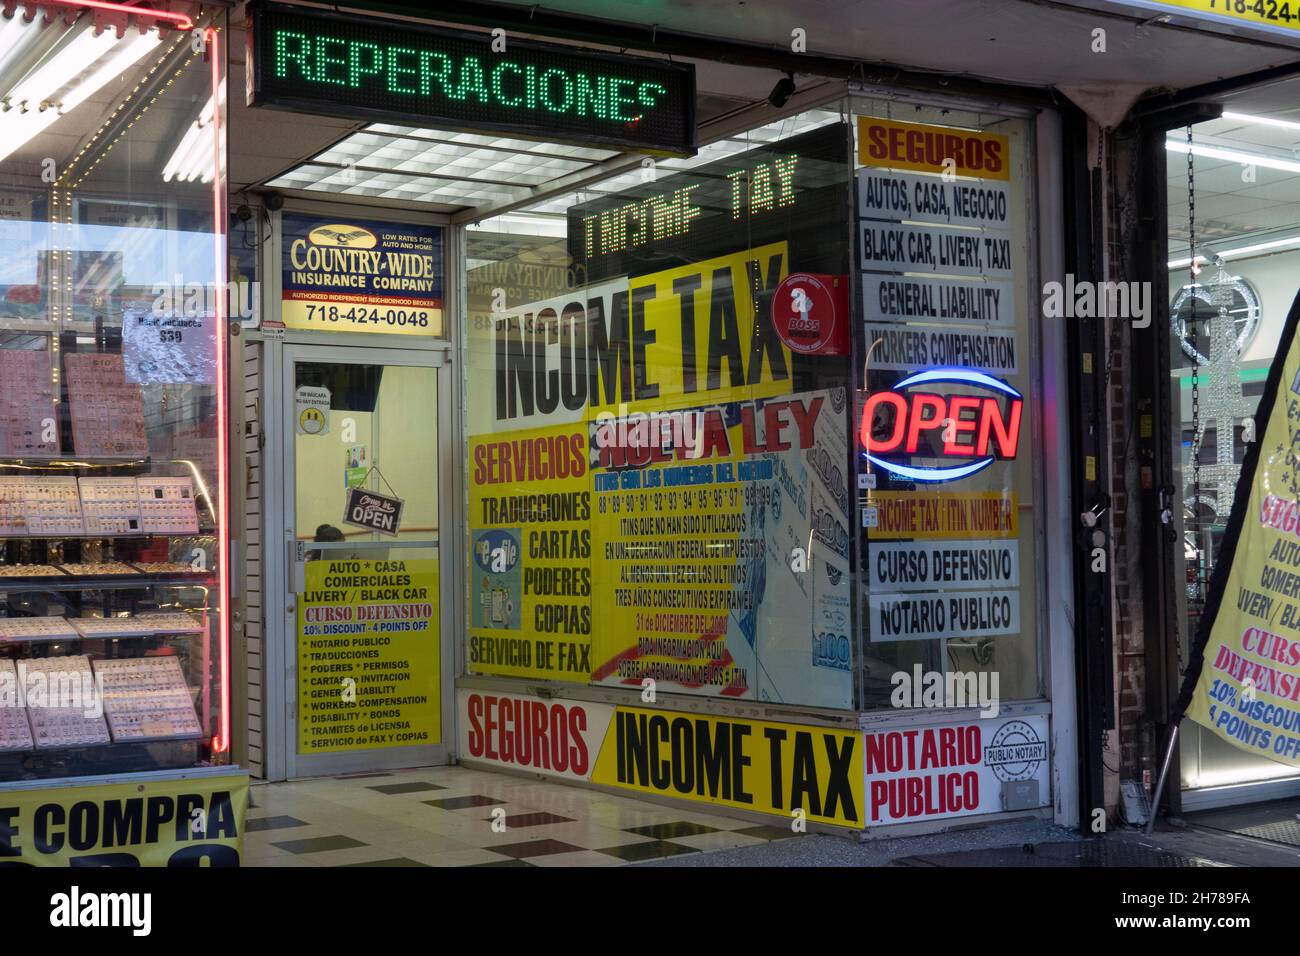 Spanish signs in a storefront in Queens that prepares taxes, gives driver's ed courses and various other financial services. Jackson Heights, New York Stock Photo